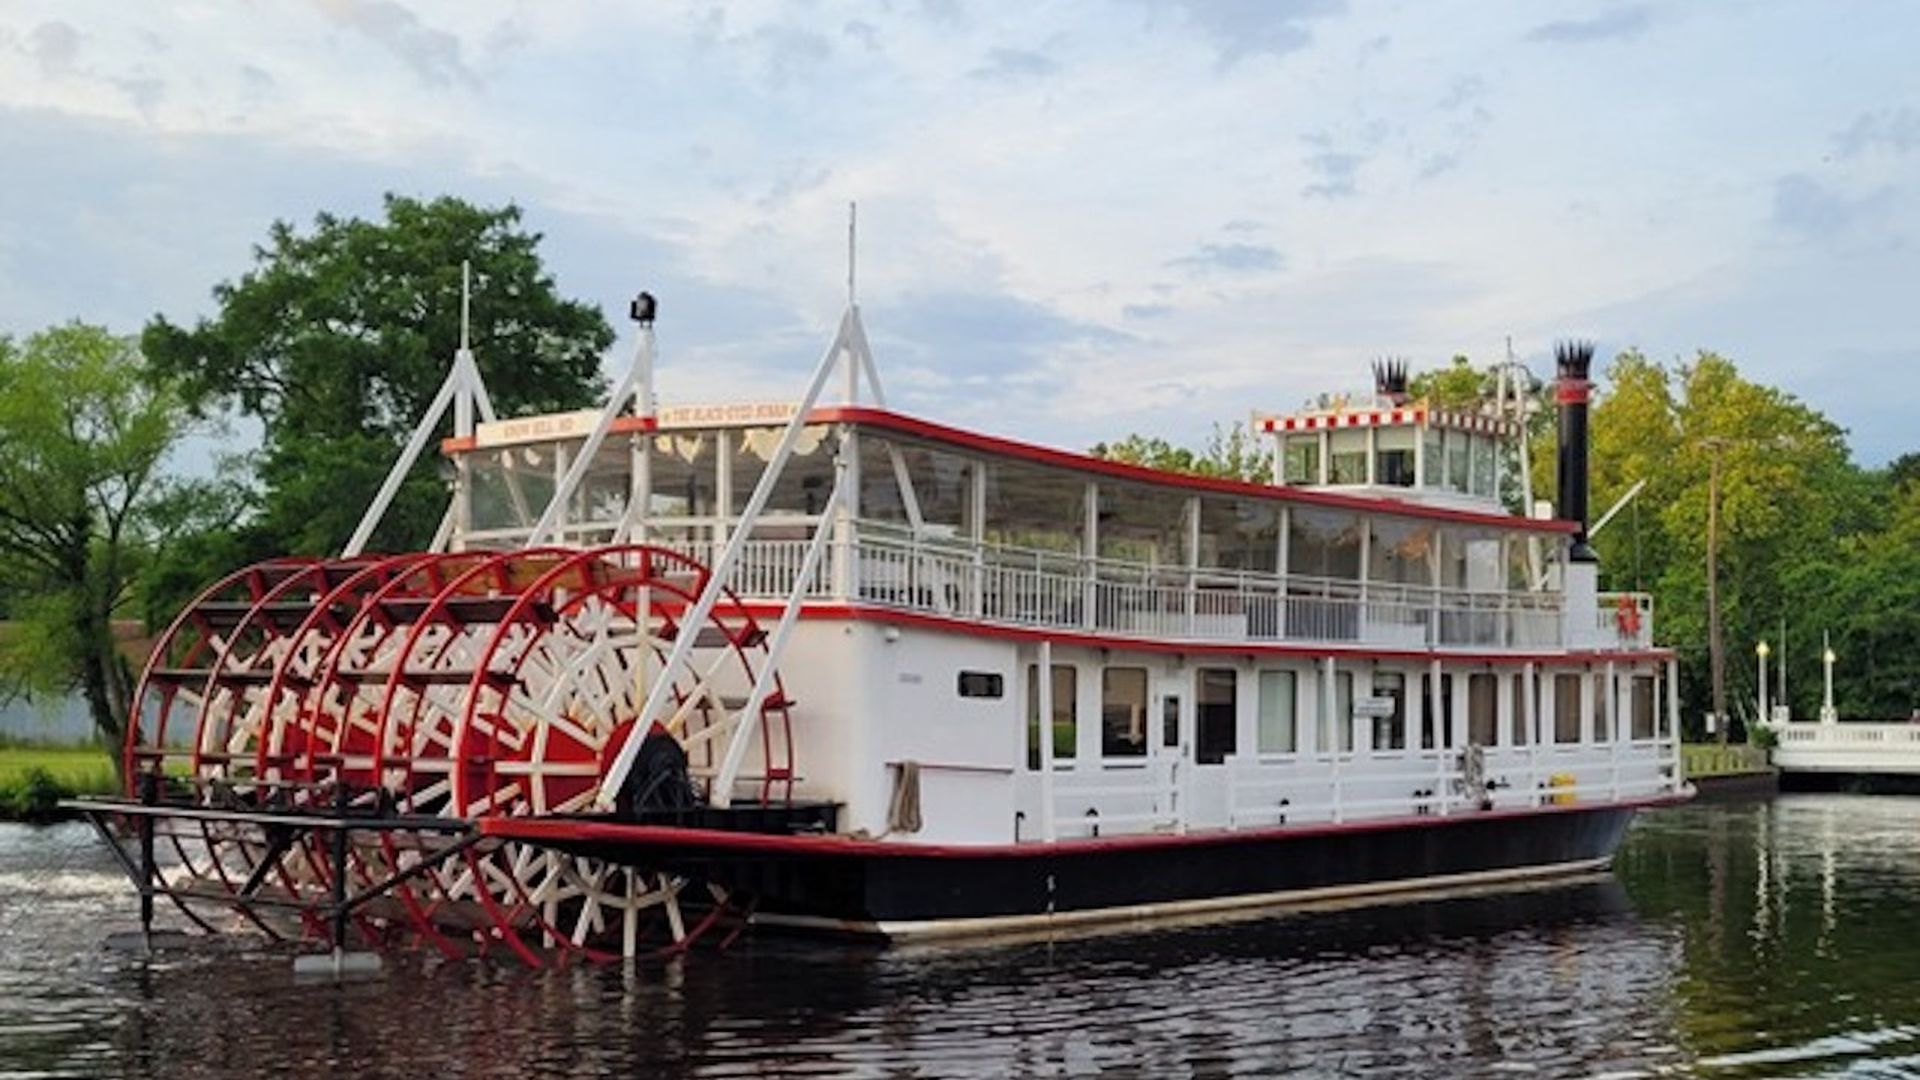 A white and red Victorian-style paddleboat on a river.